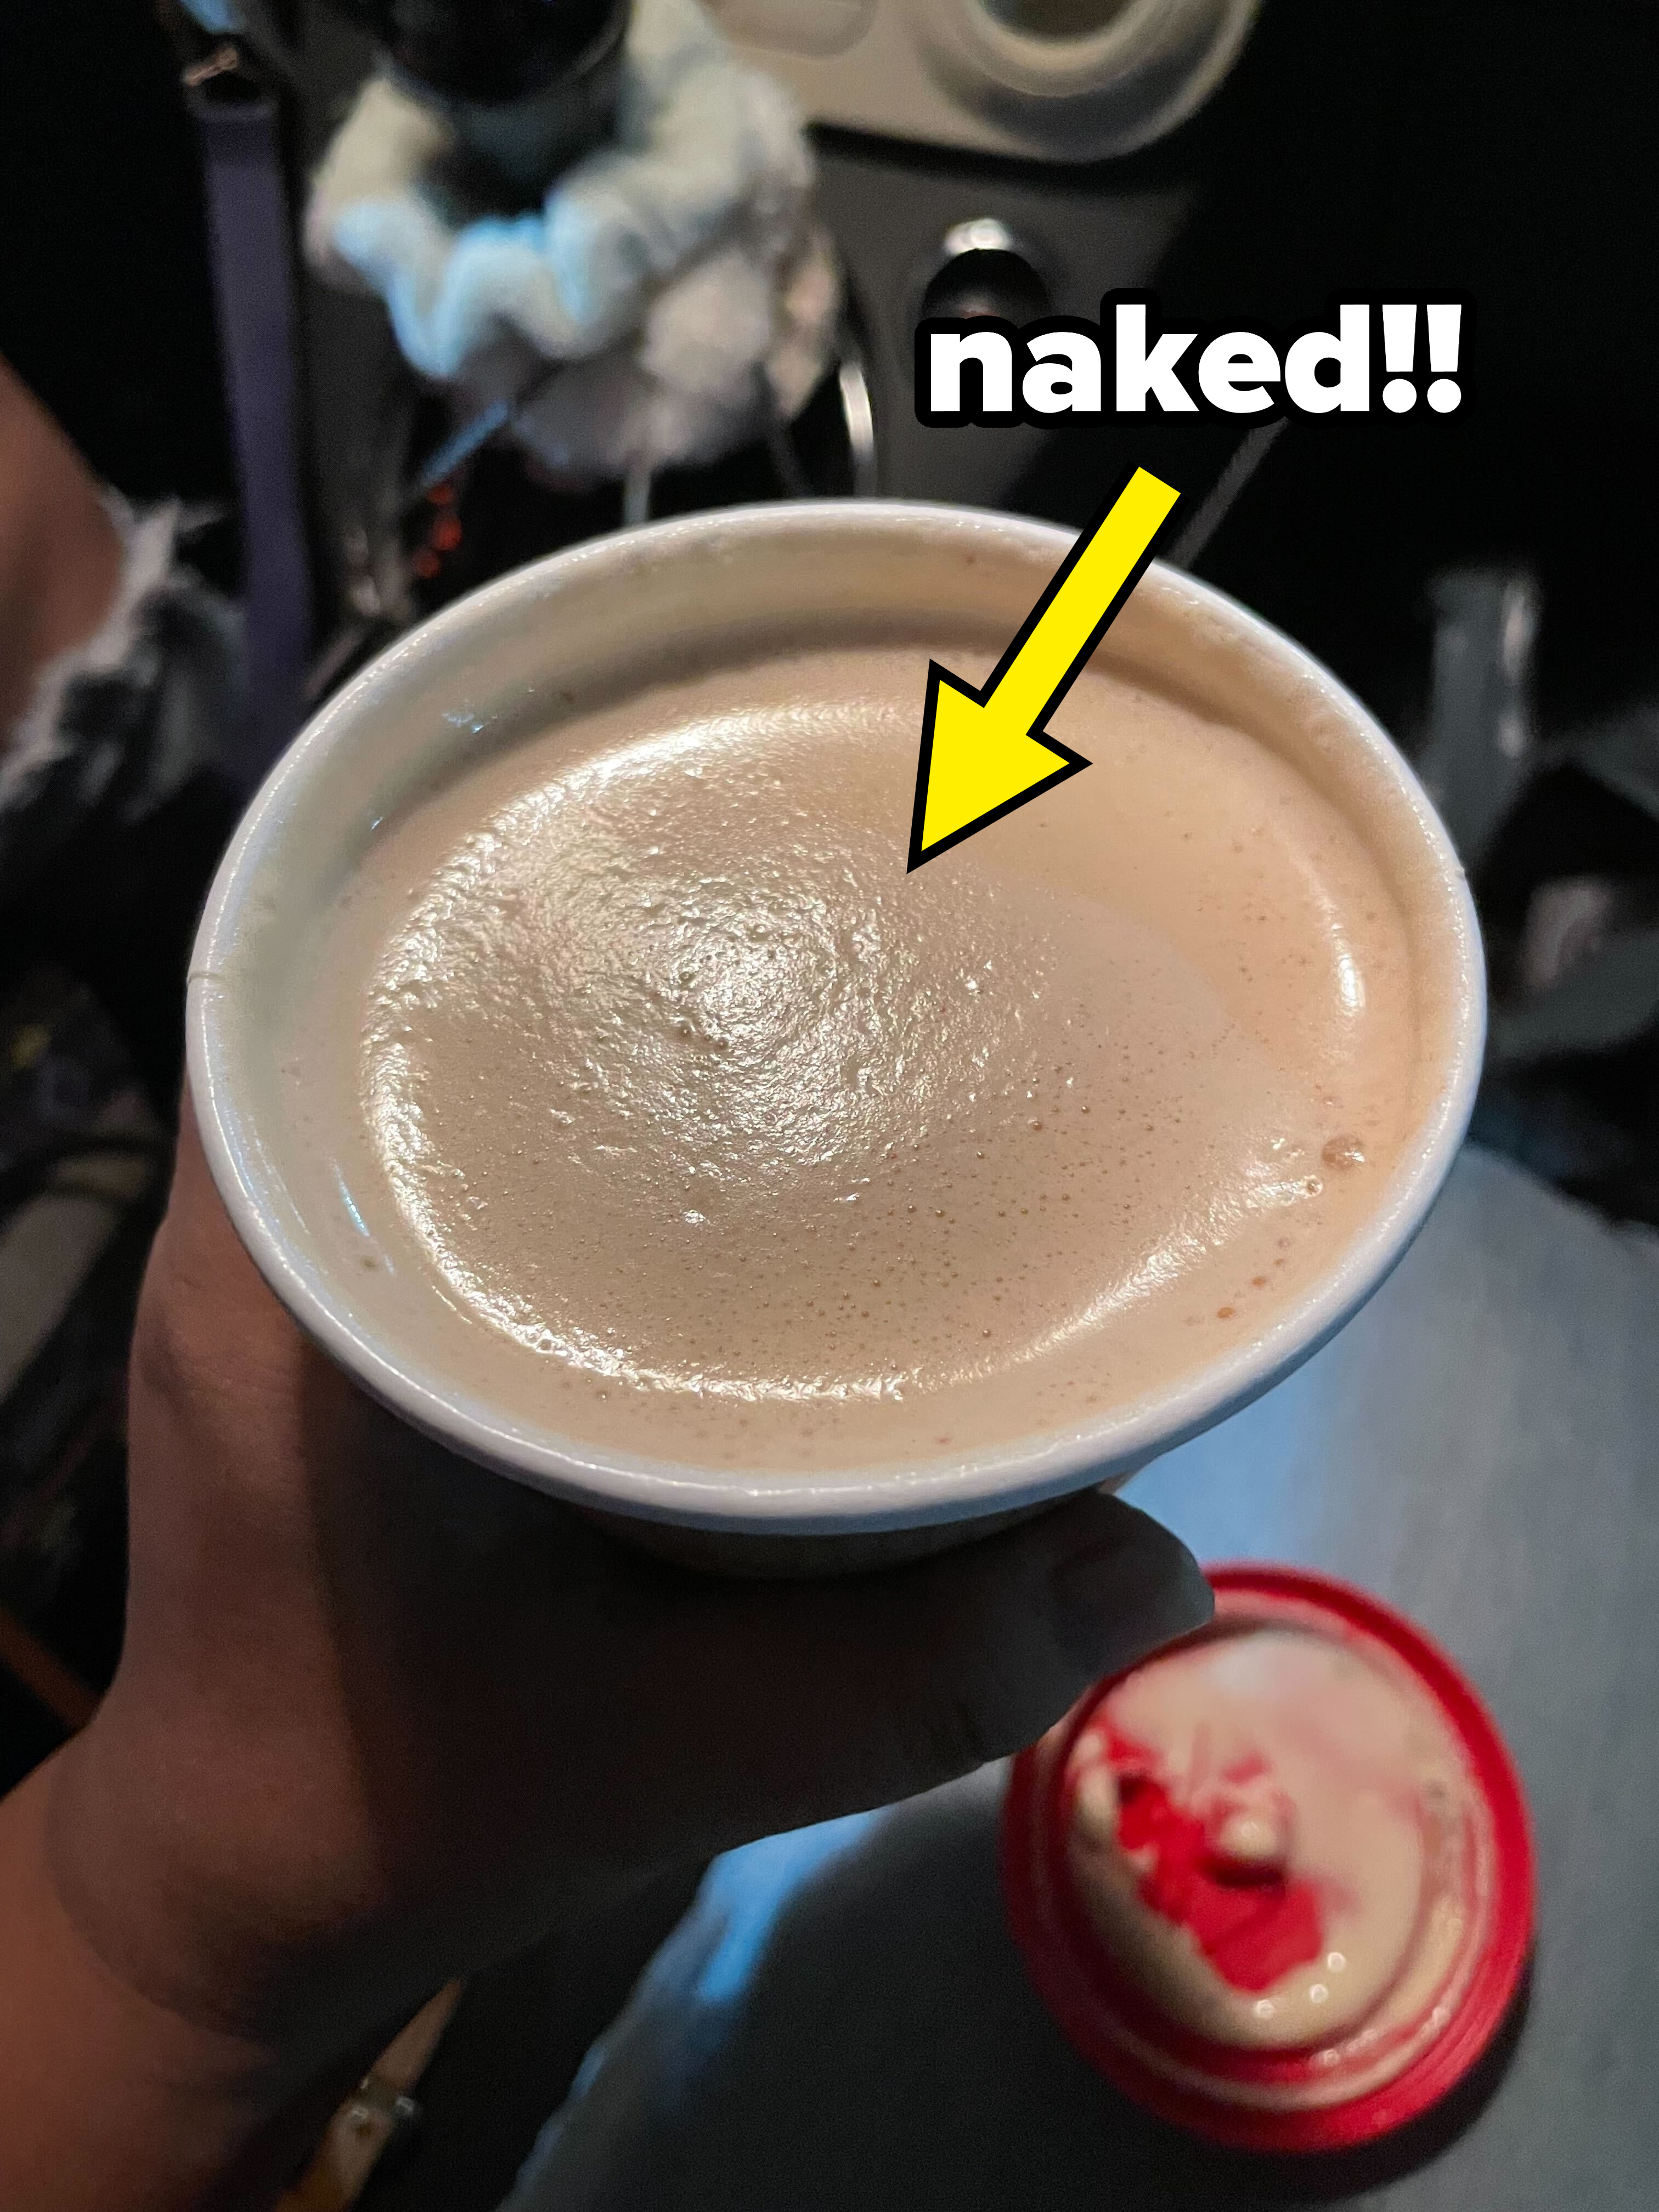 The Krispy Kreme coffee is being shown while the caption &quot;naked!!&quot;